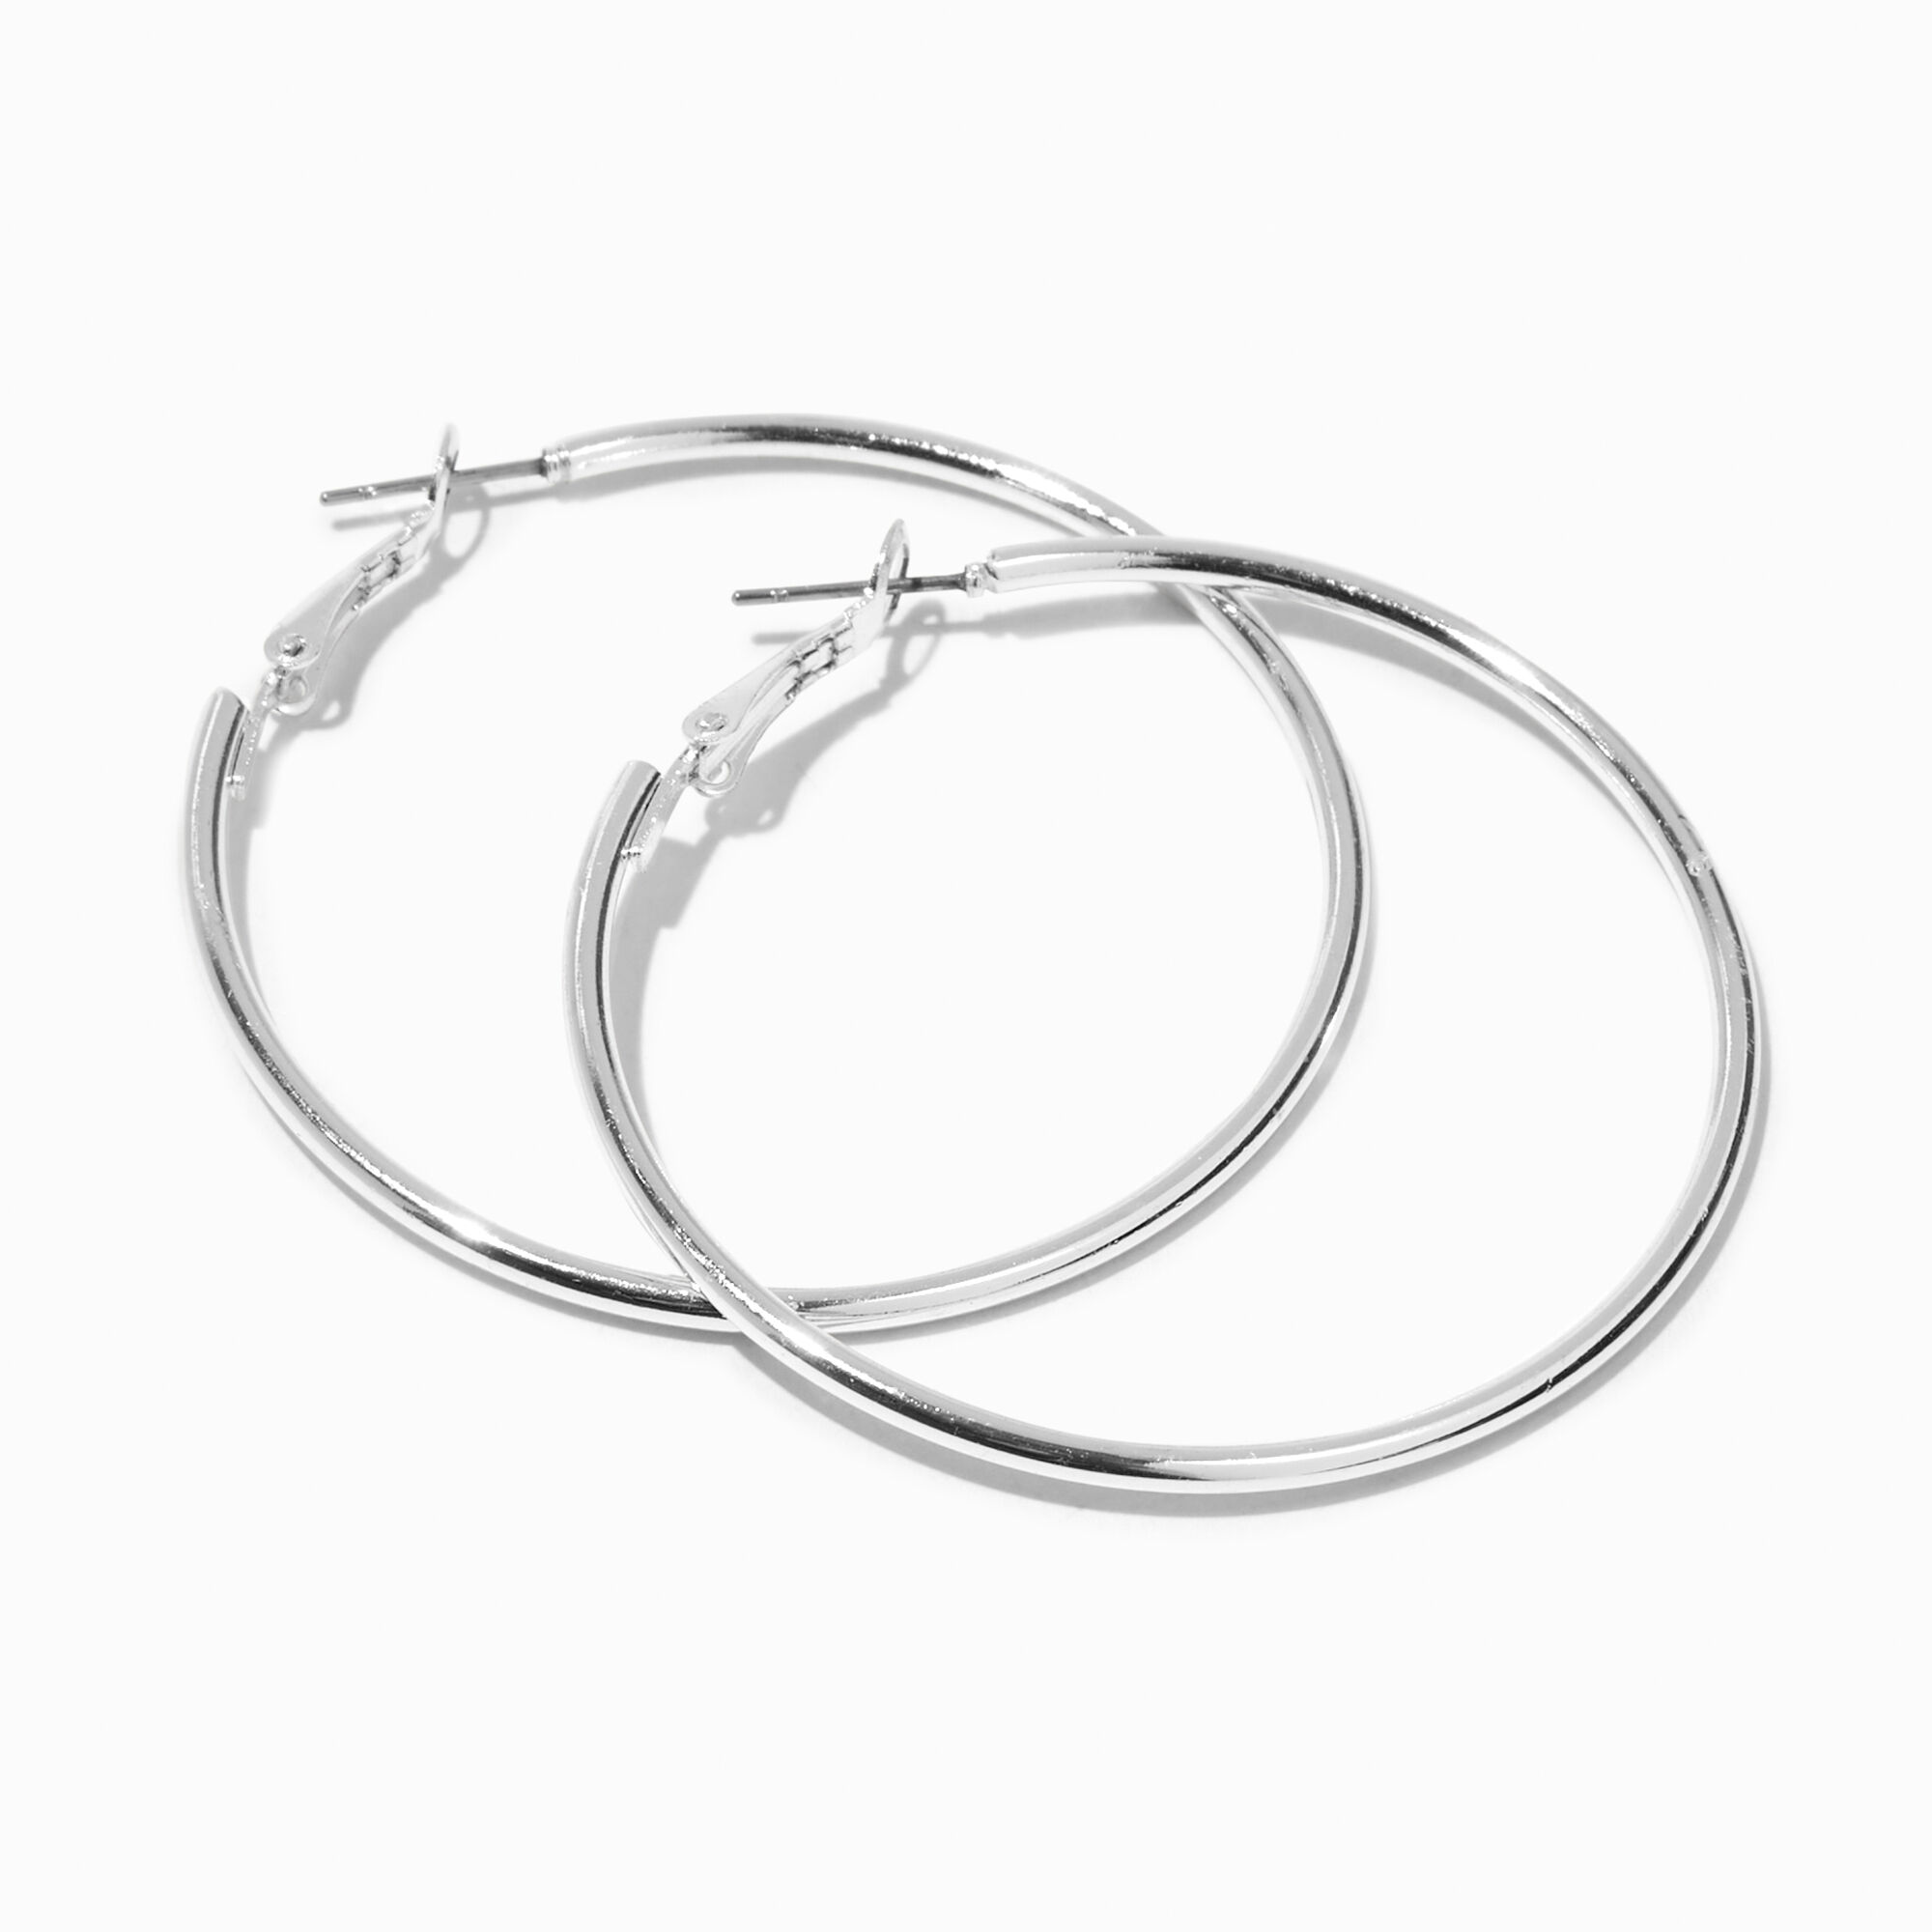 View Claires Tone 50MM Hoop Earrings Silver information